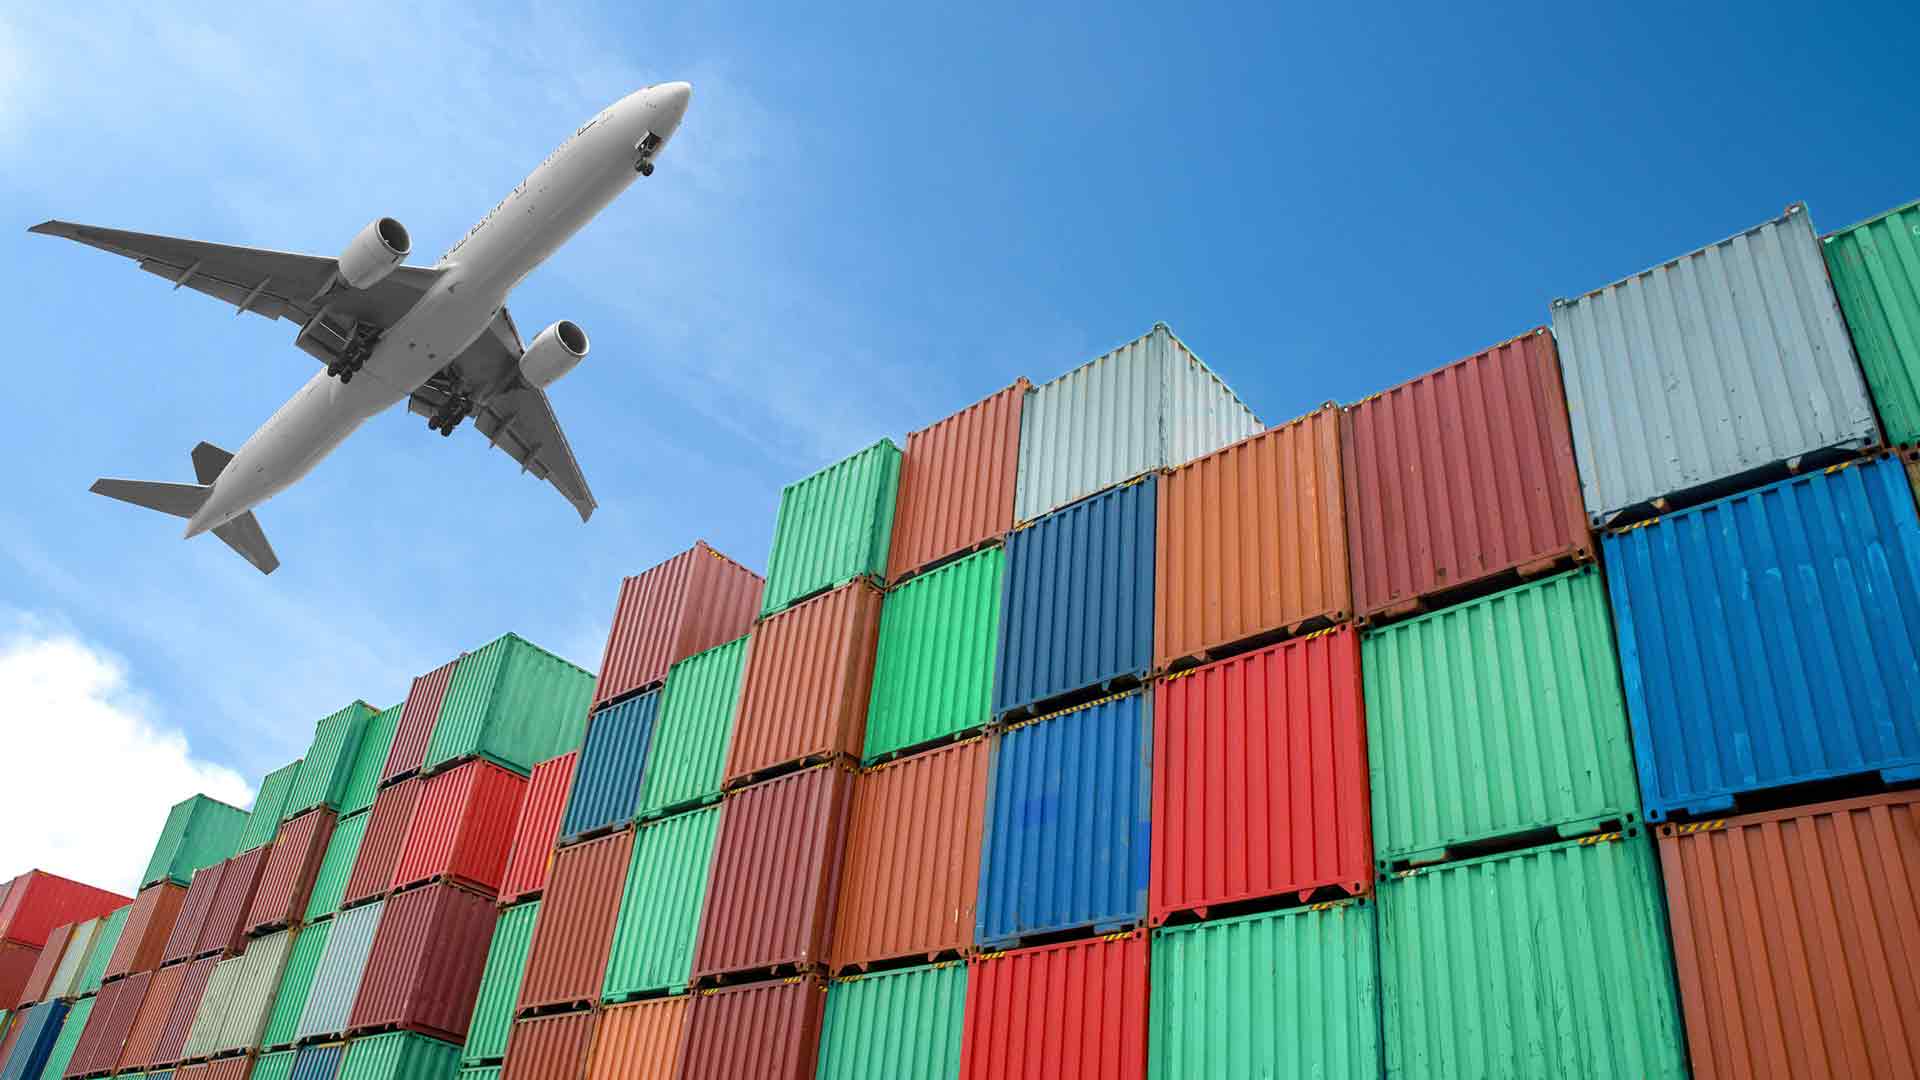 Cargo airplane transporting goods over cargo containers stacked up at port – air logistics